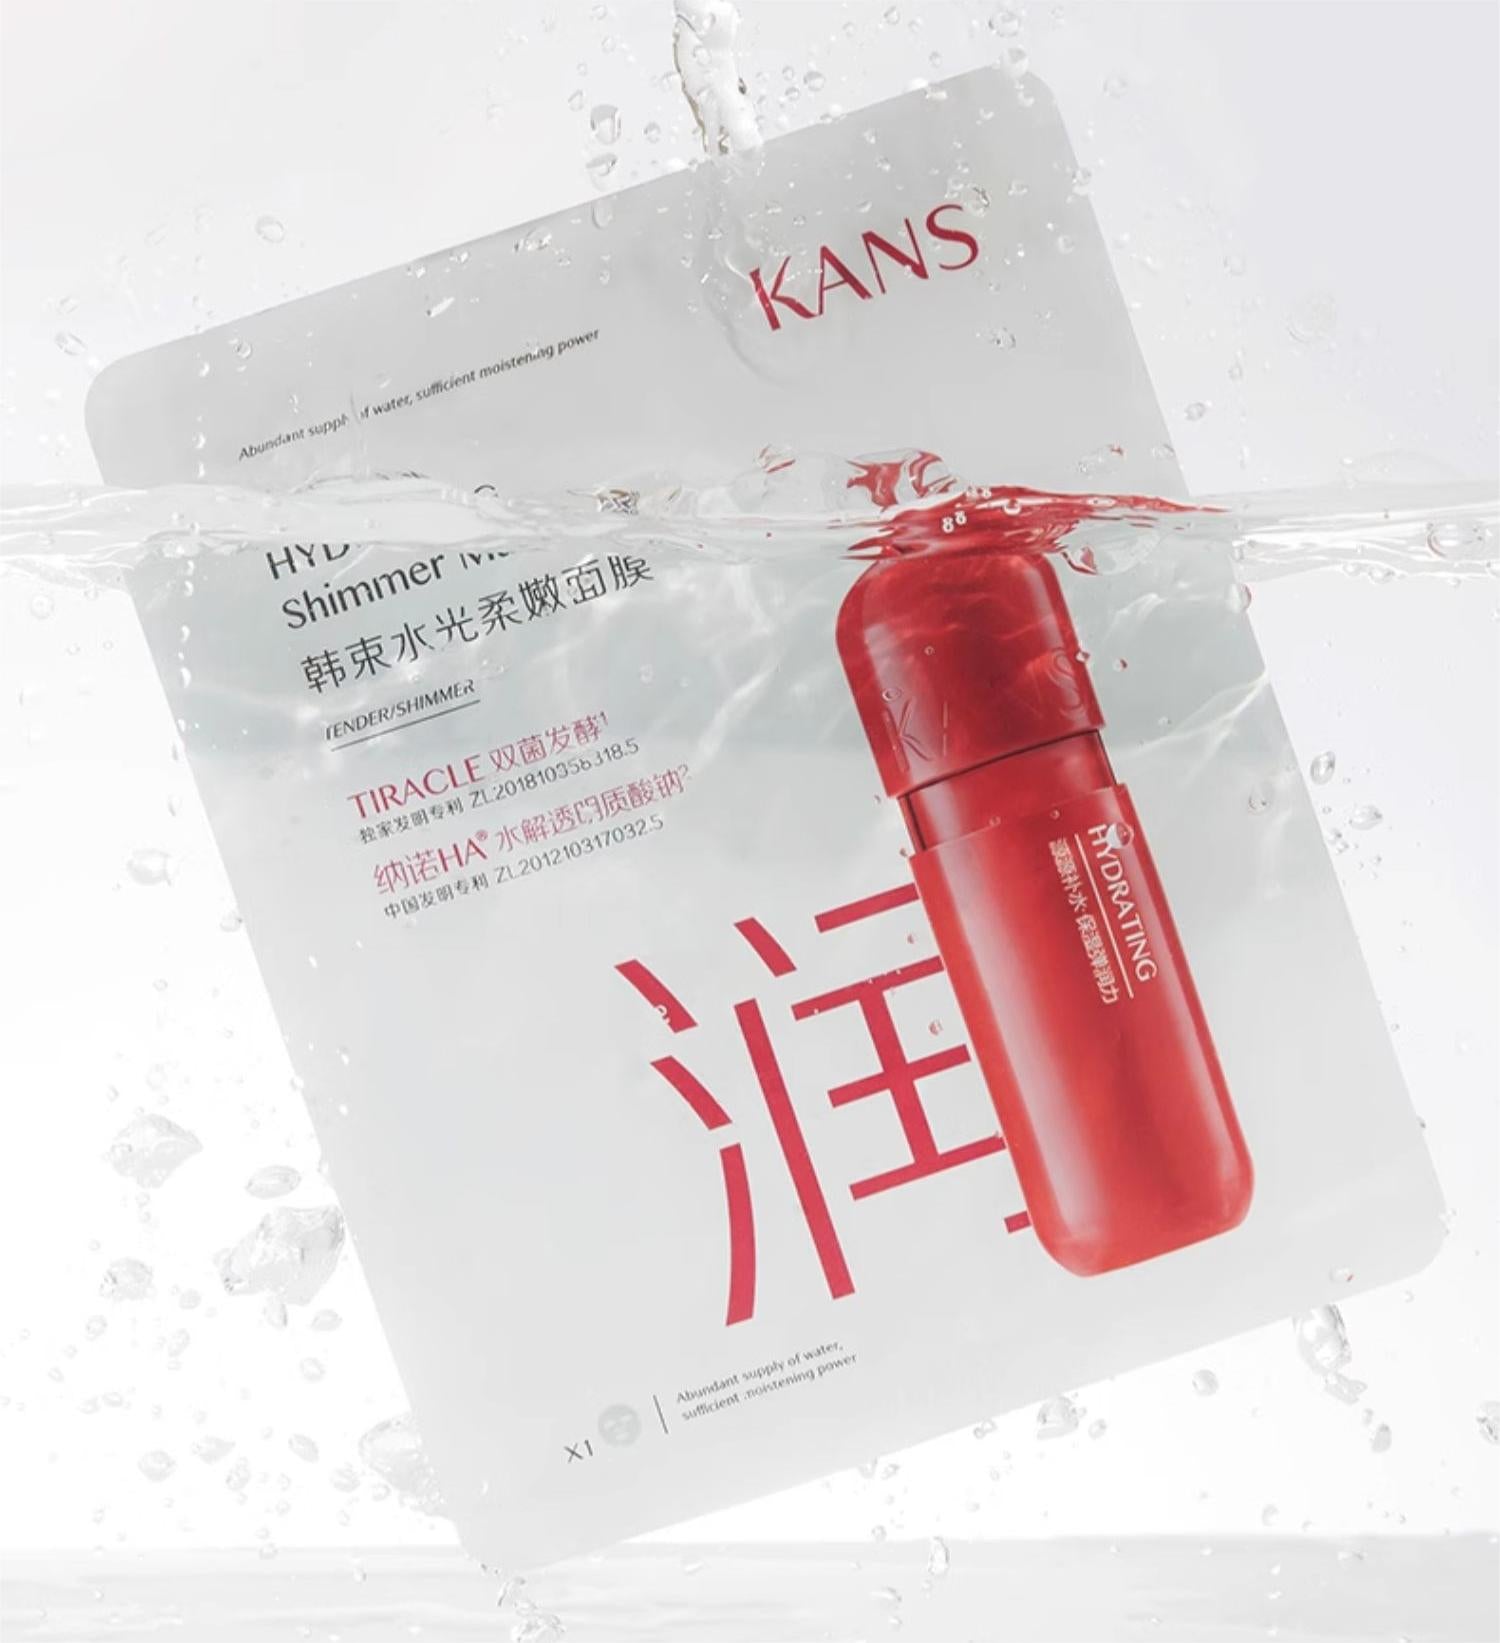 KANS Hydrating Shimmer Mask 5pieces 韩束水光柔嫩面膜